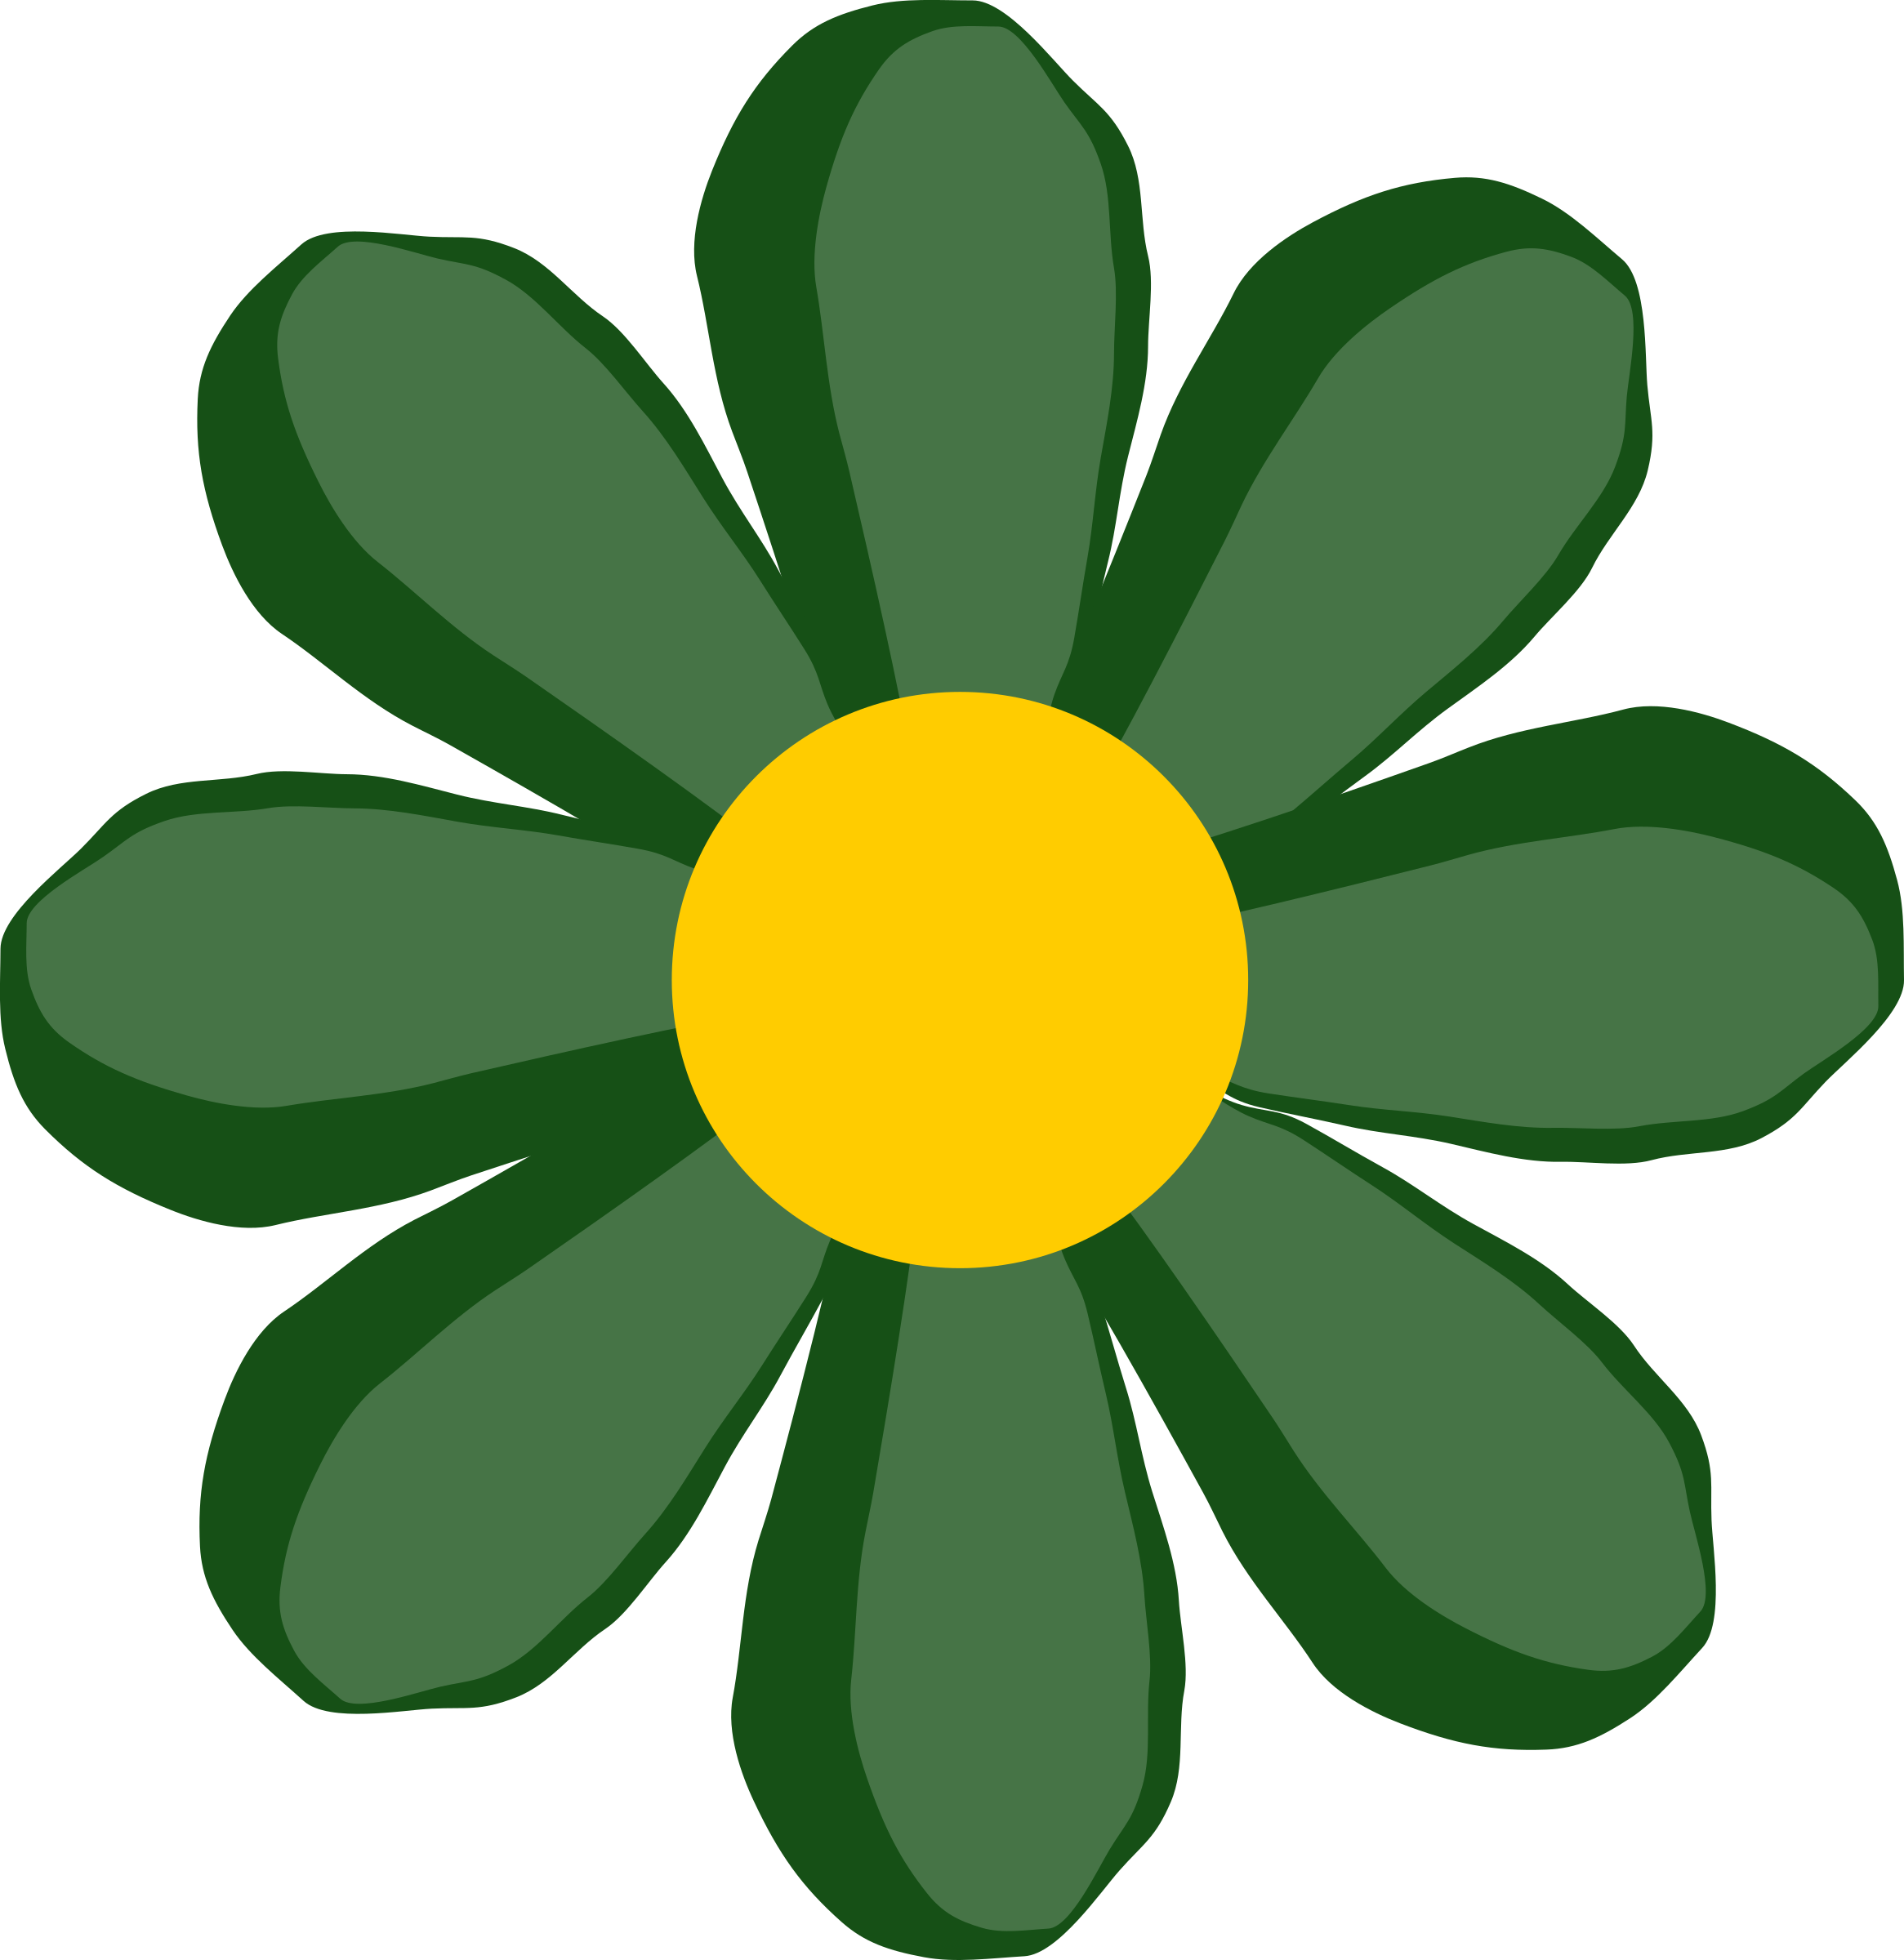 Green big image png. Hippie clipart flower power